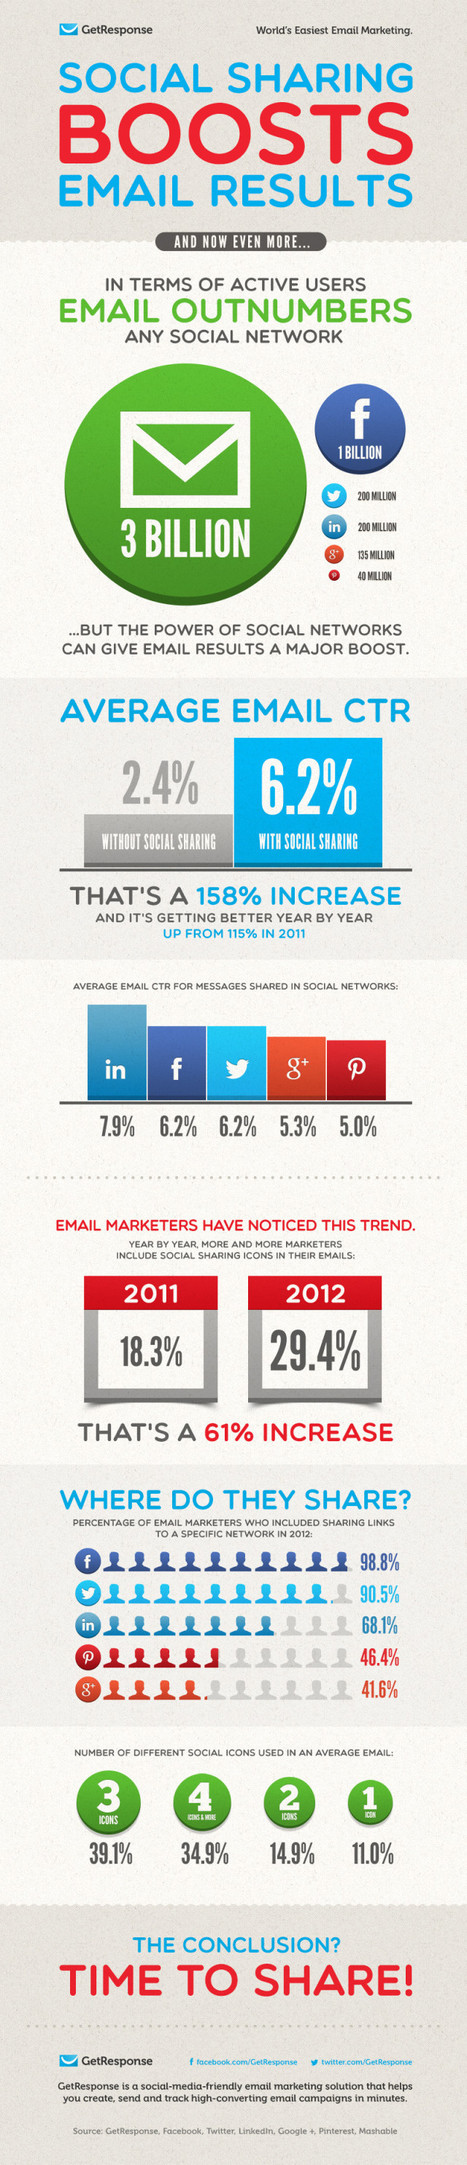 Infographic: Increase Email CTRs with Social Sharing - Marketing Technology Blog | #TheMarketingAutomationAlert | The MarTech Digest | Scoop.it